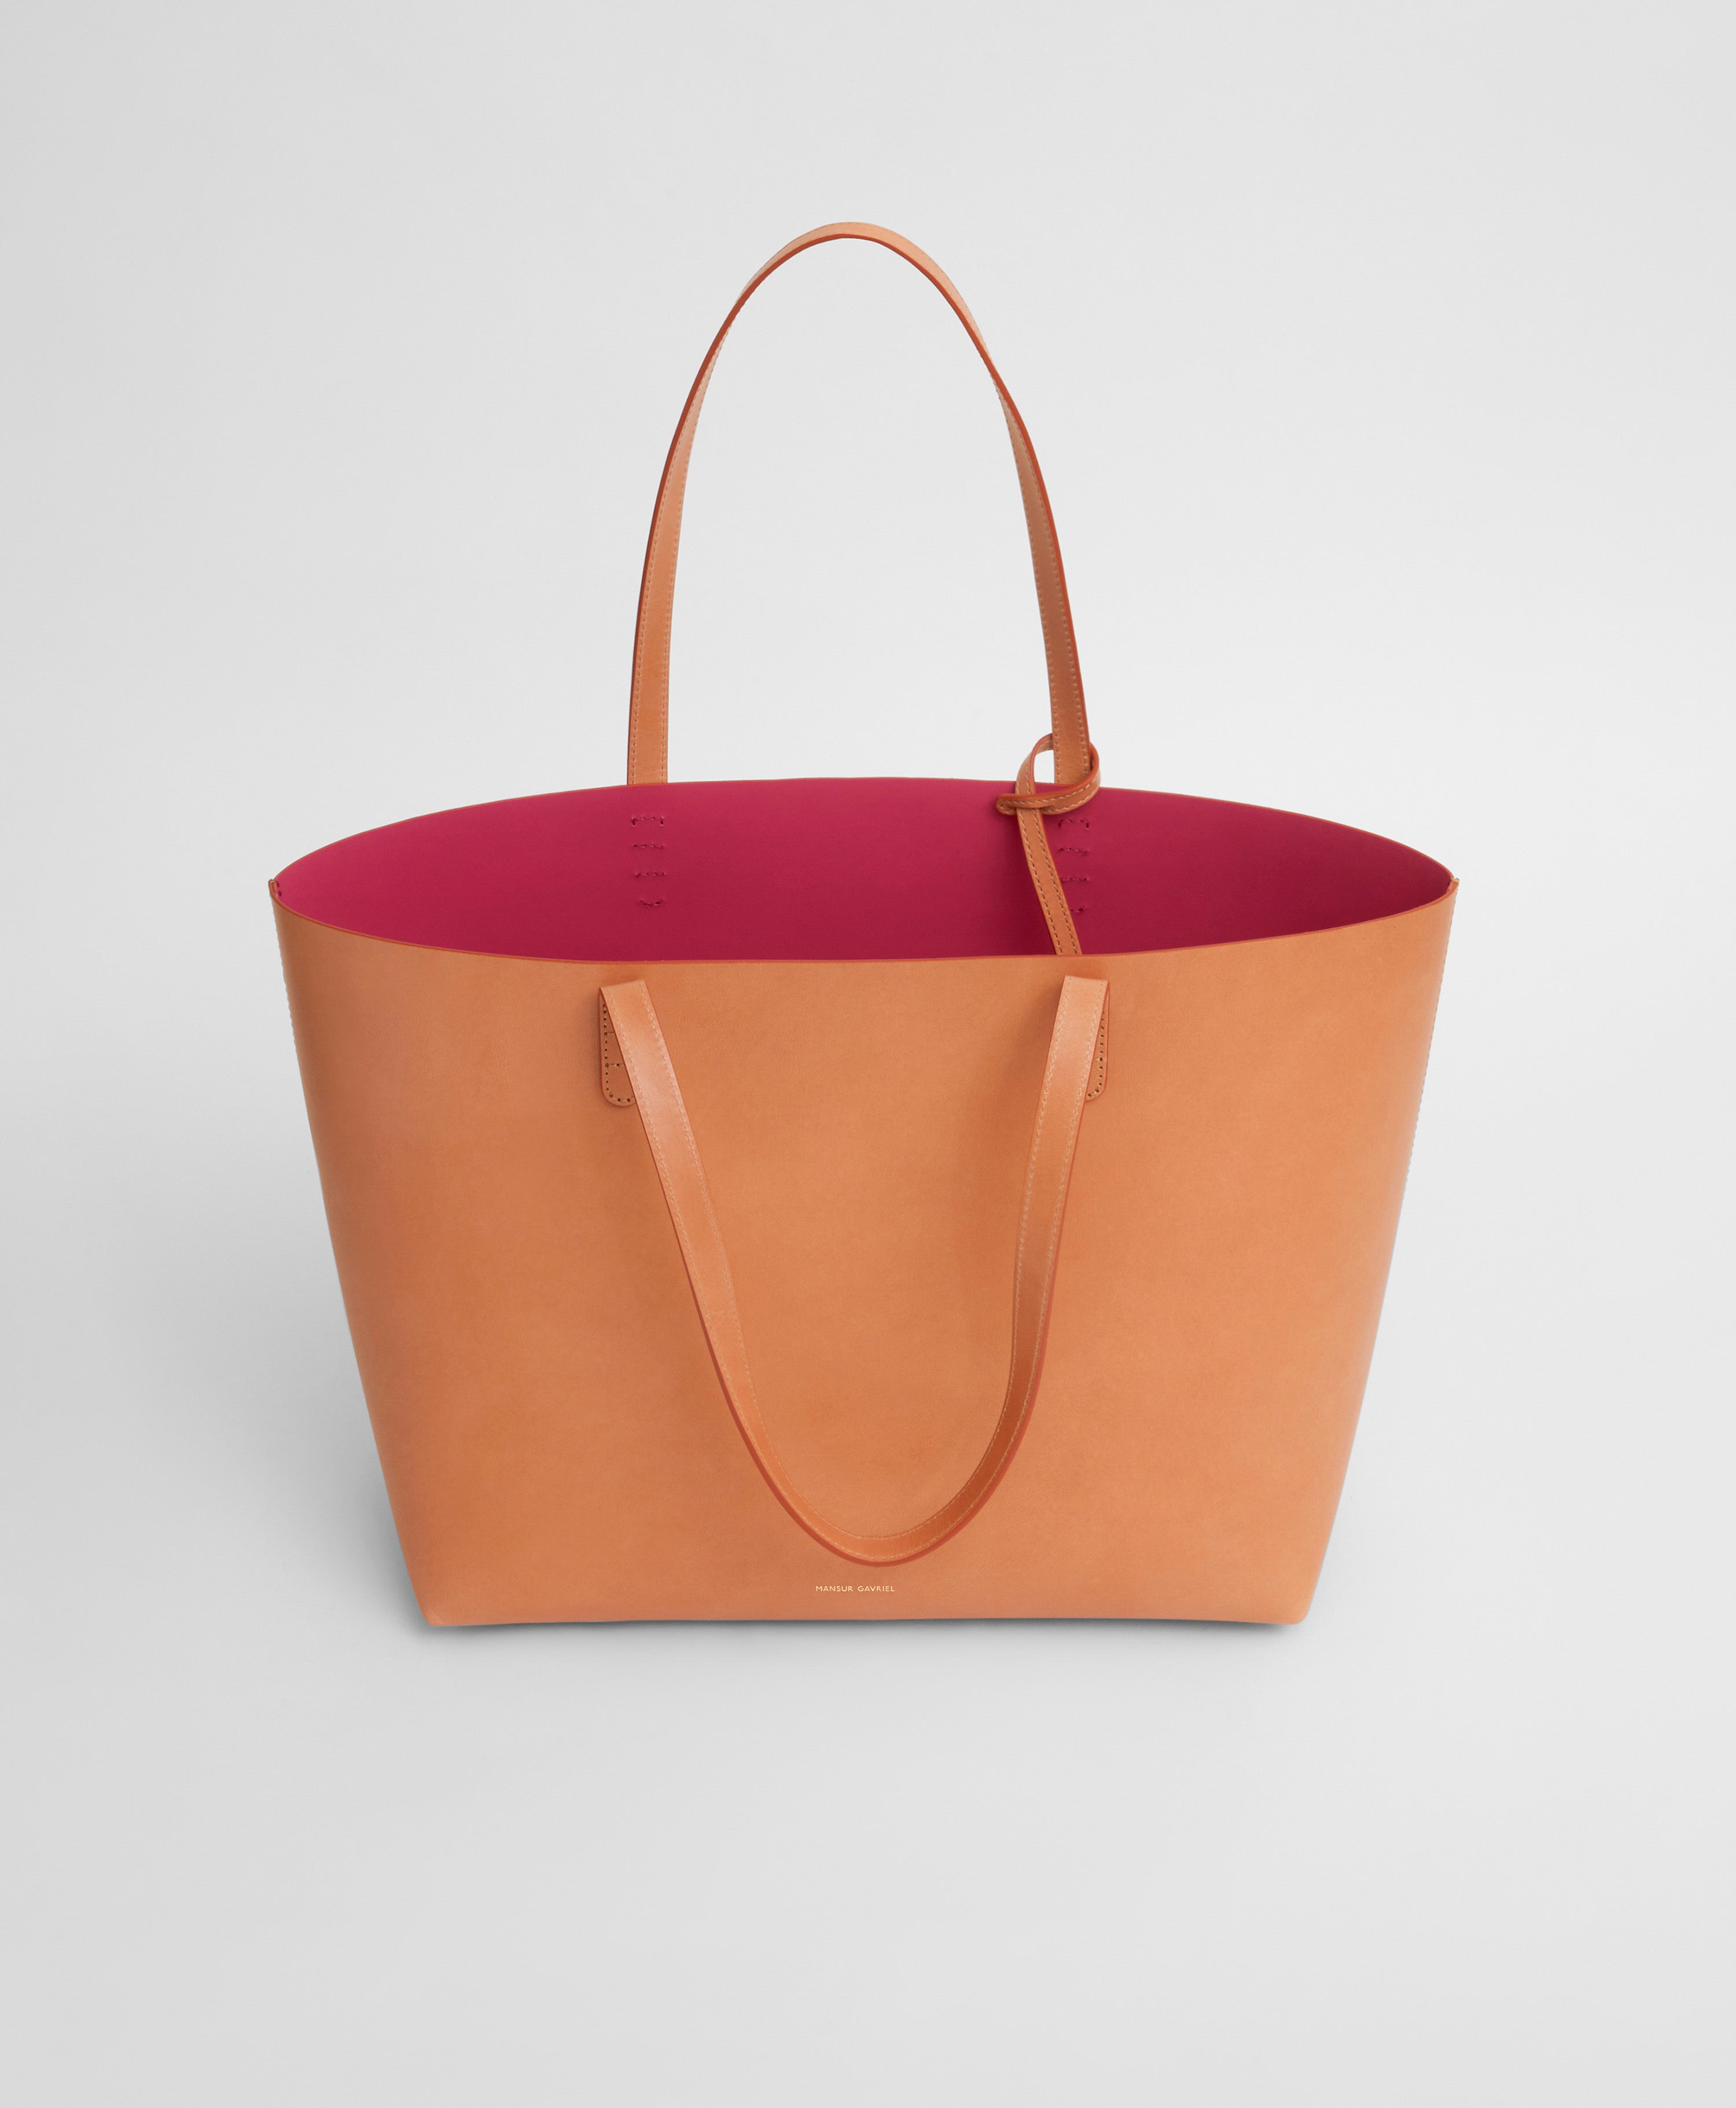 Large Tote - Cammello/Royal